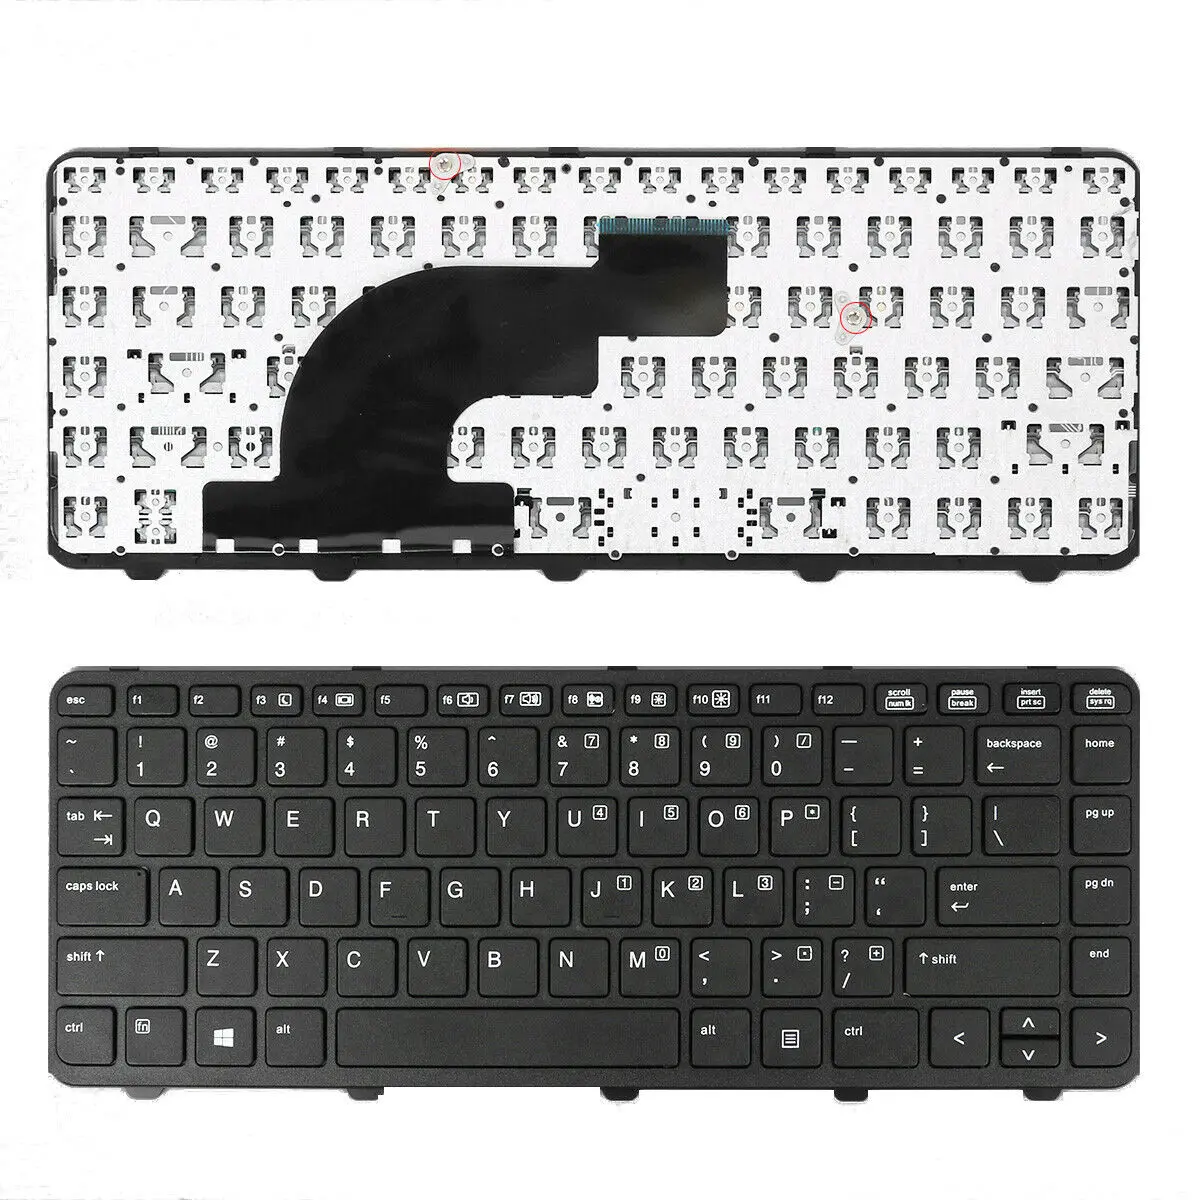 New English US Layout Keyboard For HP PROBOOK 640 G1 645 G1 US 738687-001 Win8 BLACK FRAME BLACK